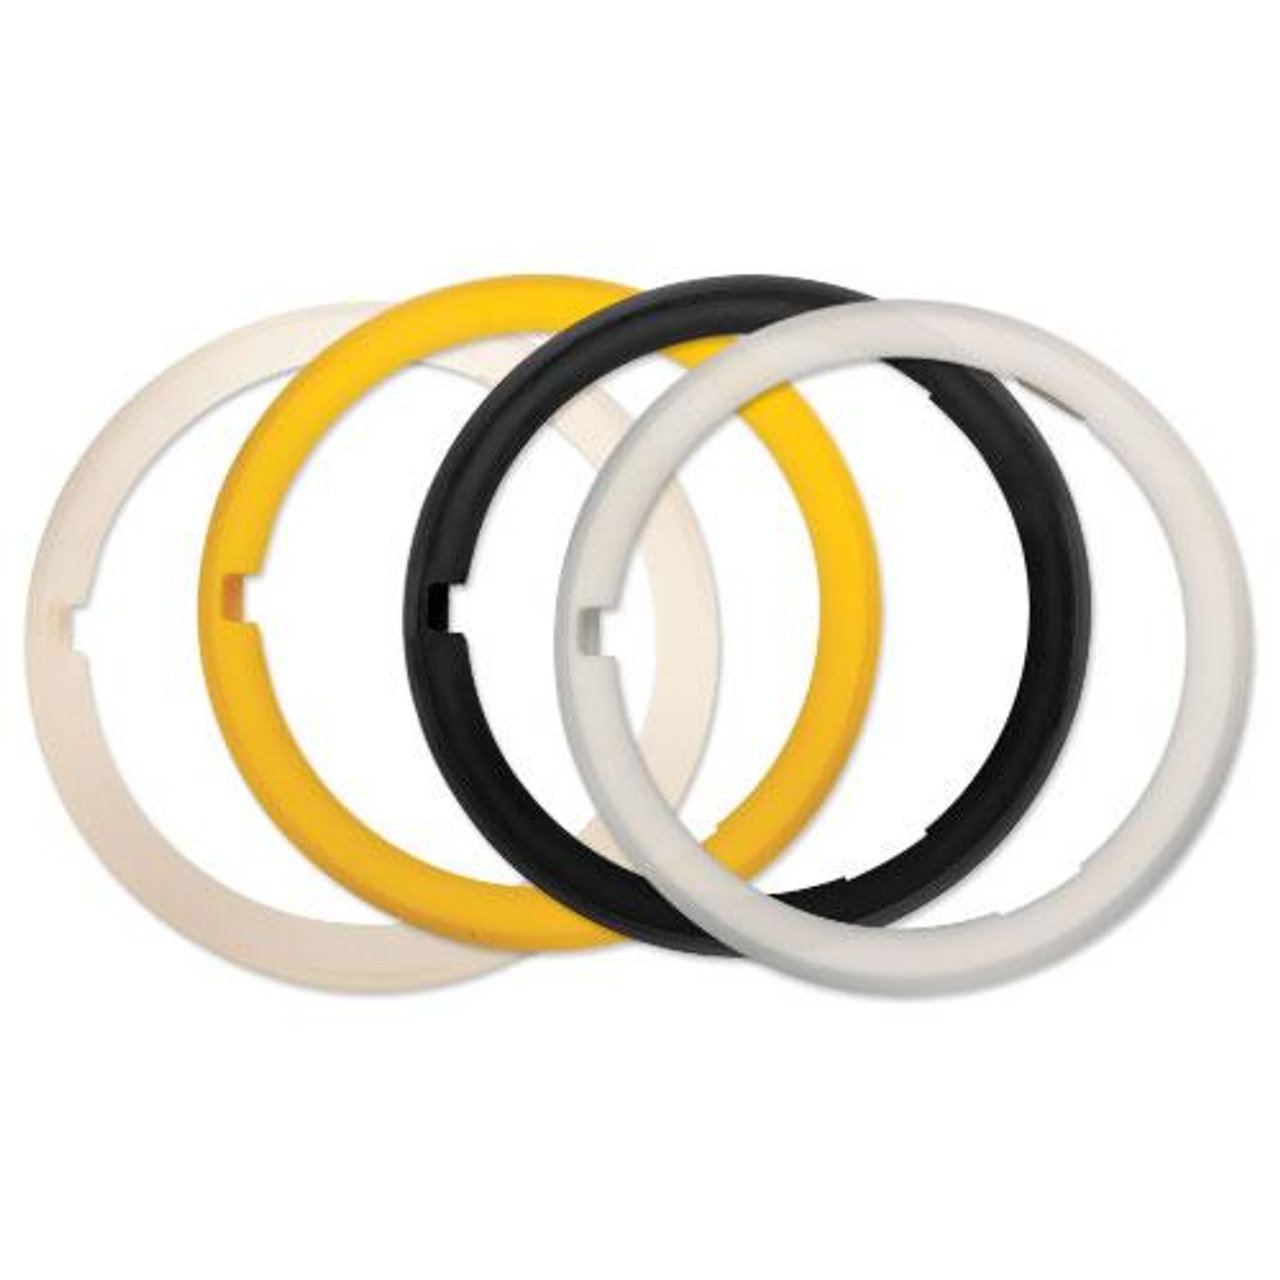 https://cdn11.bigcommerce.com/s-uv5can9due/images/stencil/1280x1280/products/7527/190227/Luhr-Jensen-Dipsy-Diver-O-Rings-4-pack__95961.1576258332.jpg?c=2